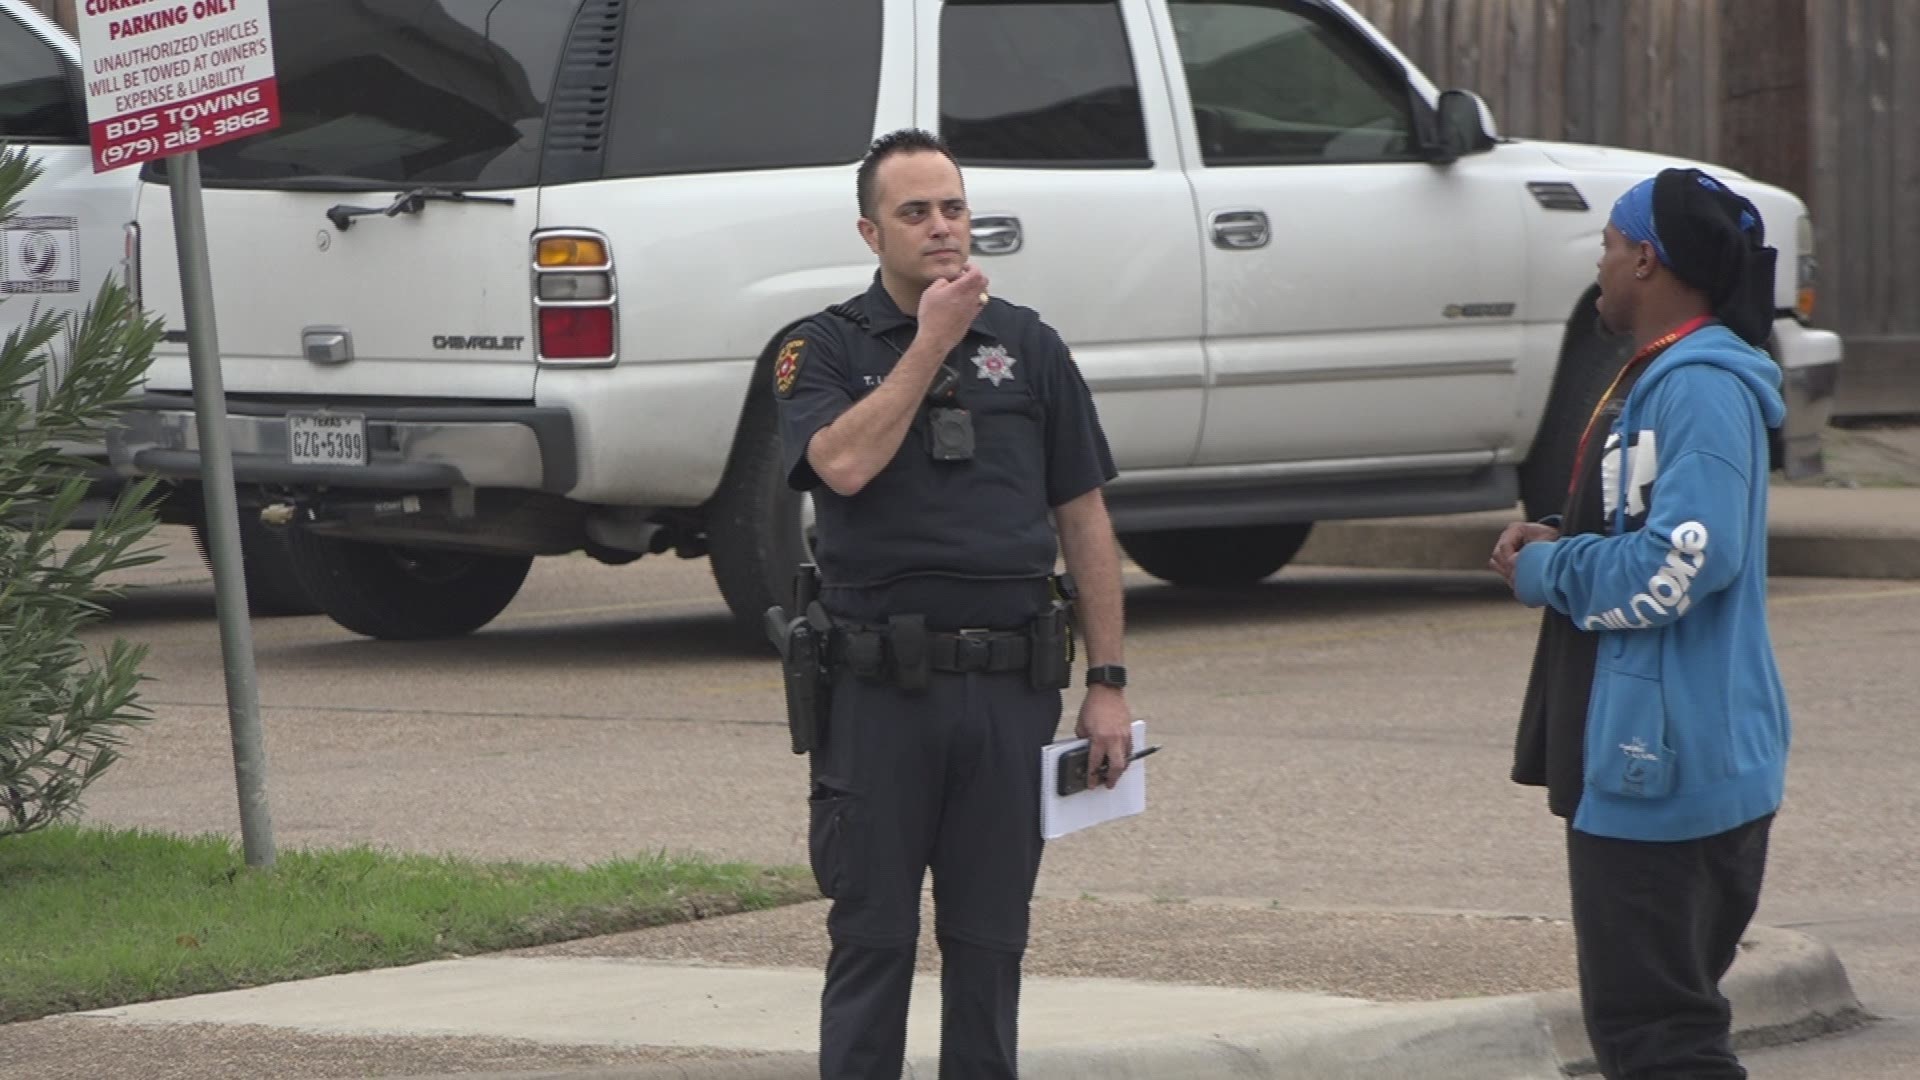 College Station police are searching for a man who ran from SWAT members trying to serve a warrant Sunday morning.